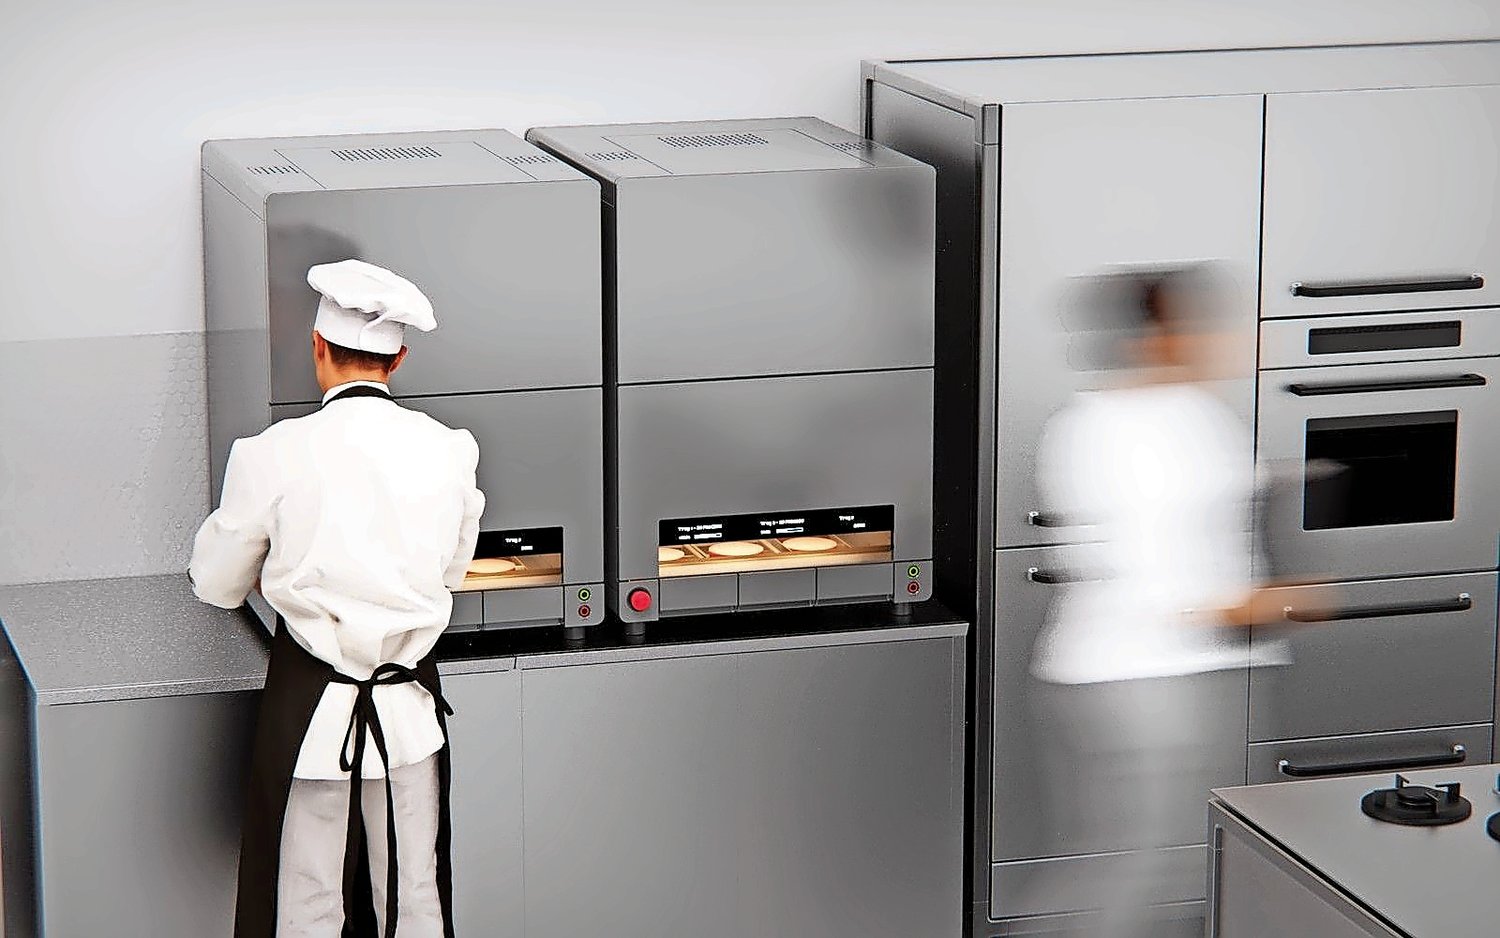 The RobotChef is designed for the food-service industry initially.